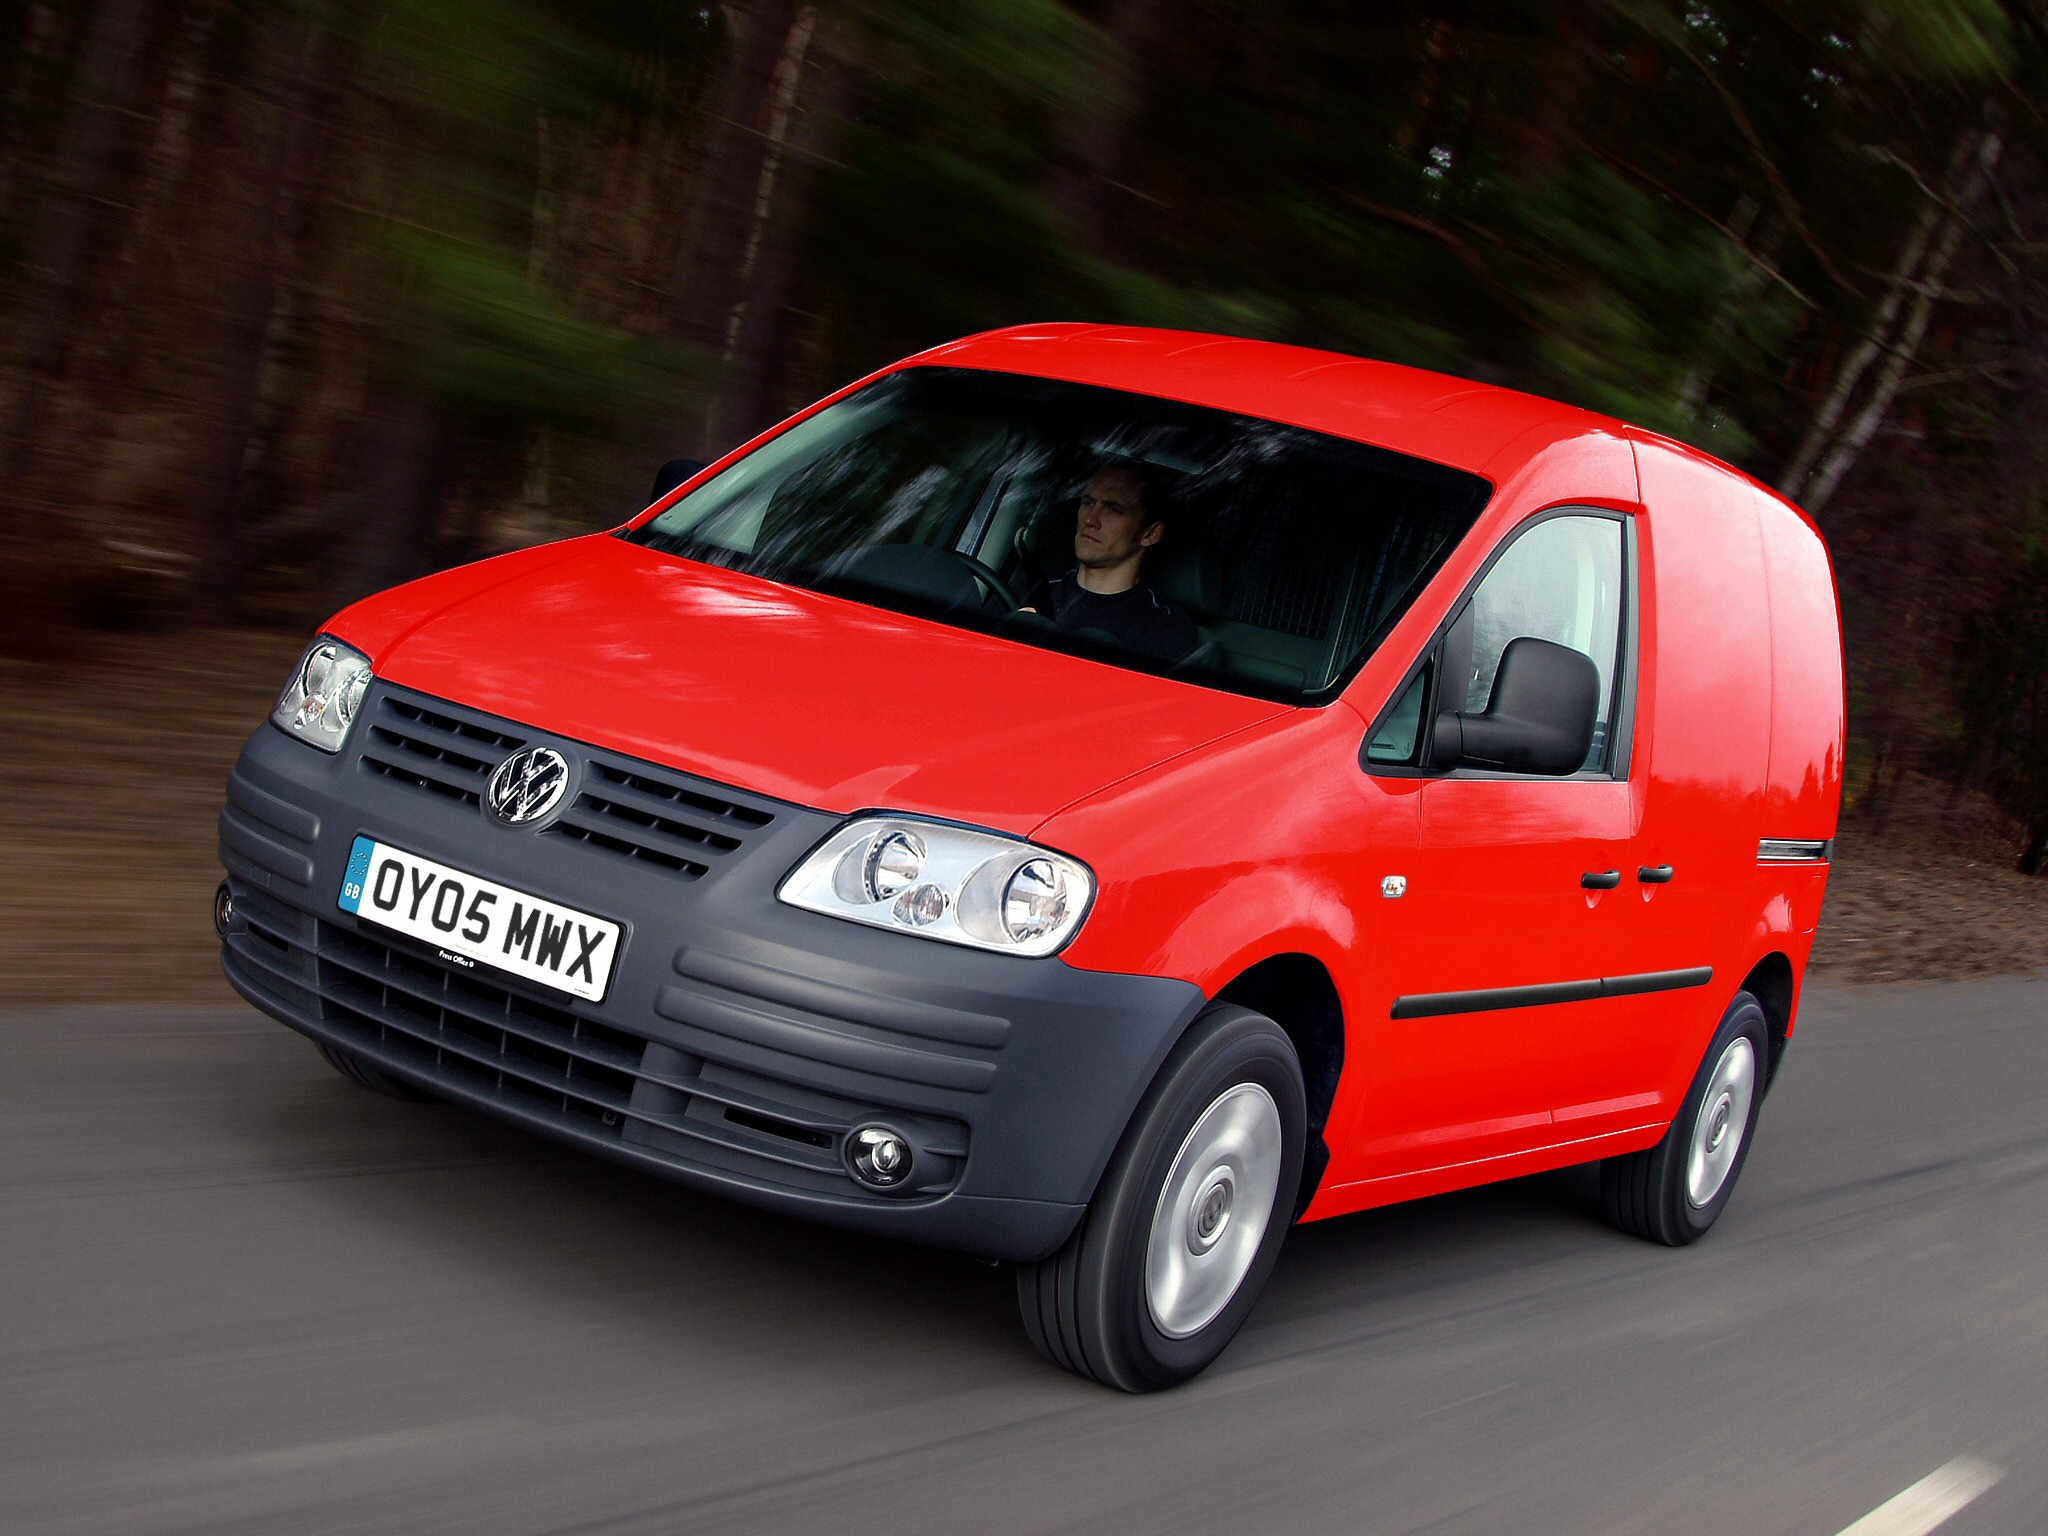 Volkswagen Caddy 2005 Photo | Car in pictures car photo gallery